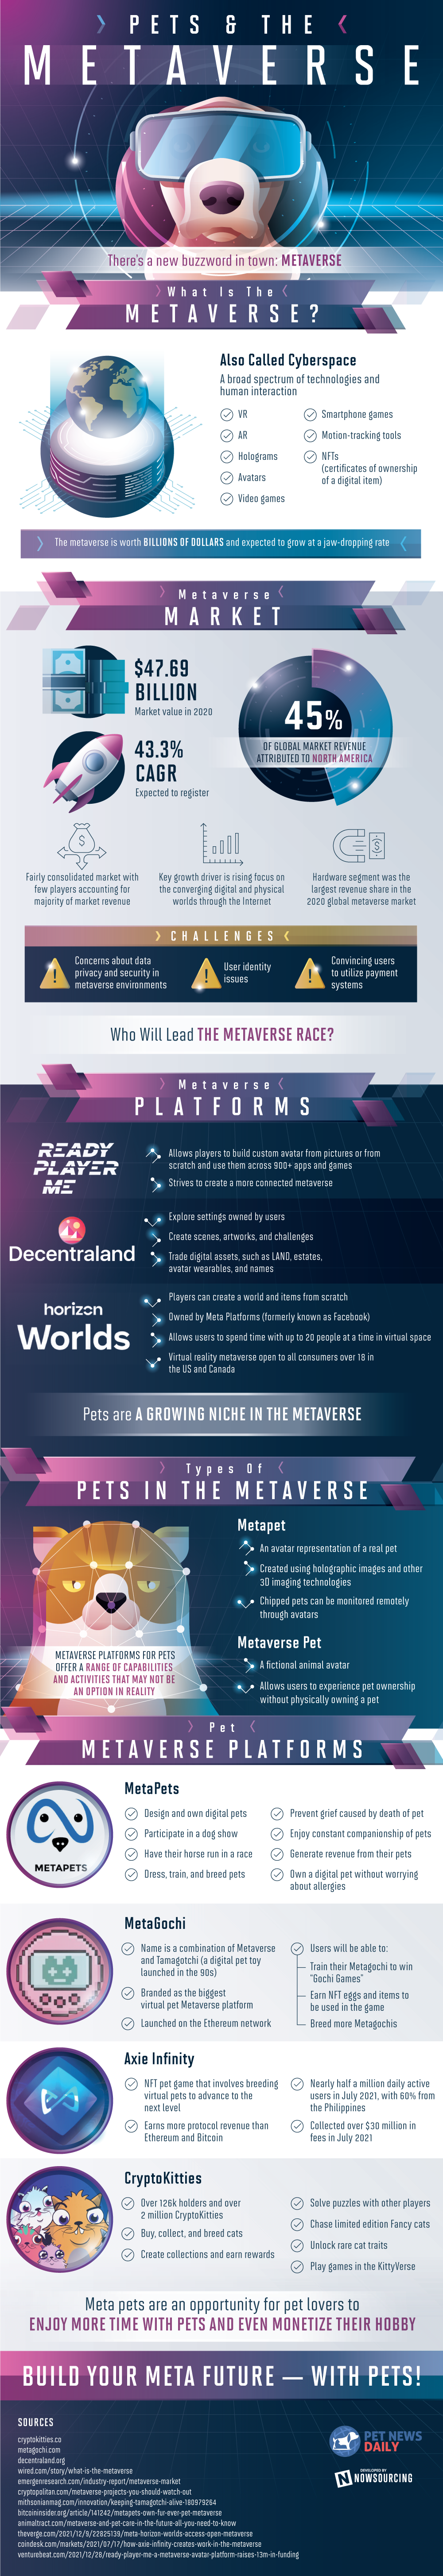 [Infographic] Will there be pets in the Metaverse?